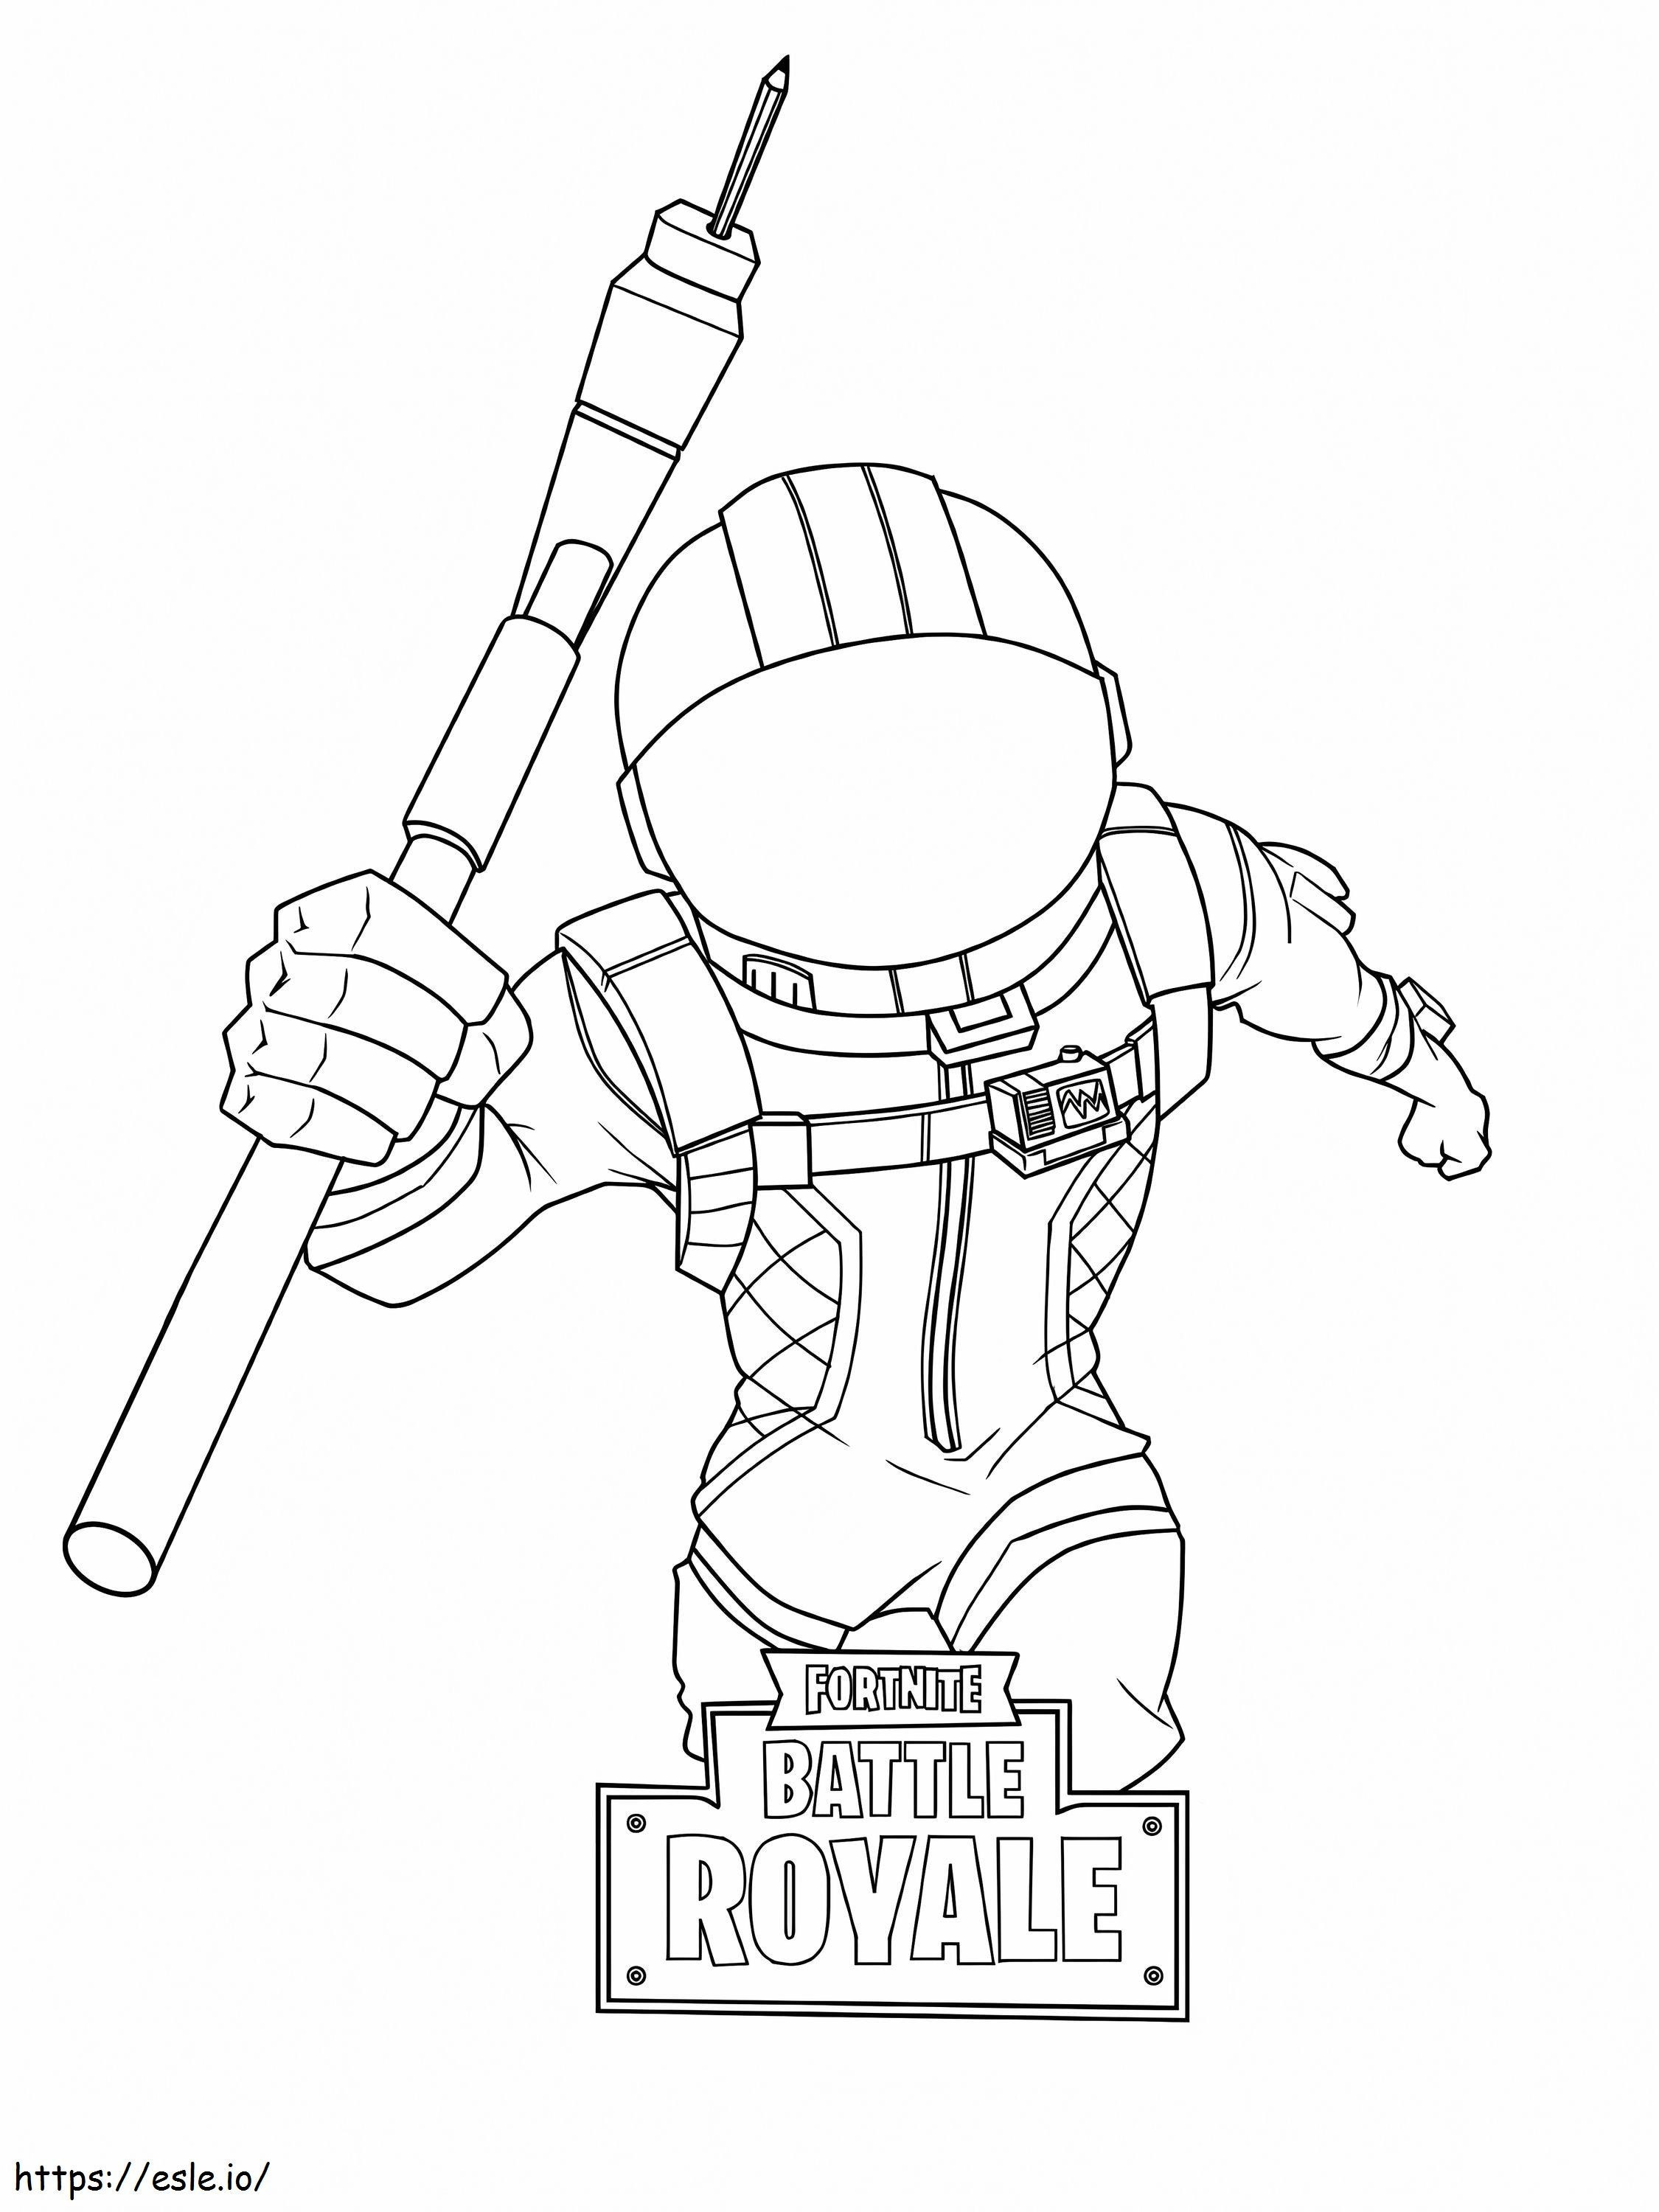 1545789369_Fortnite_005 coloring page